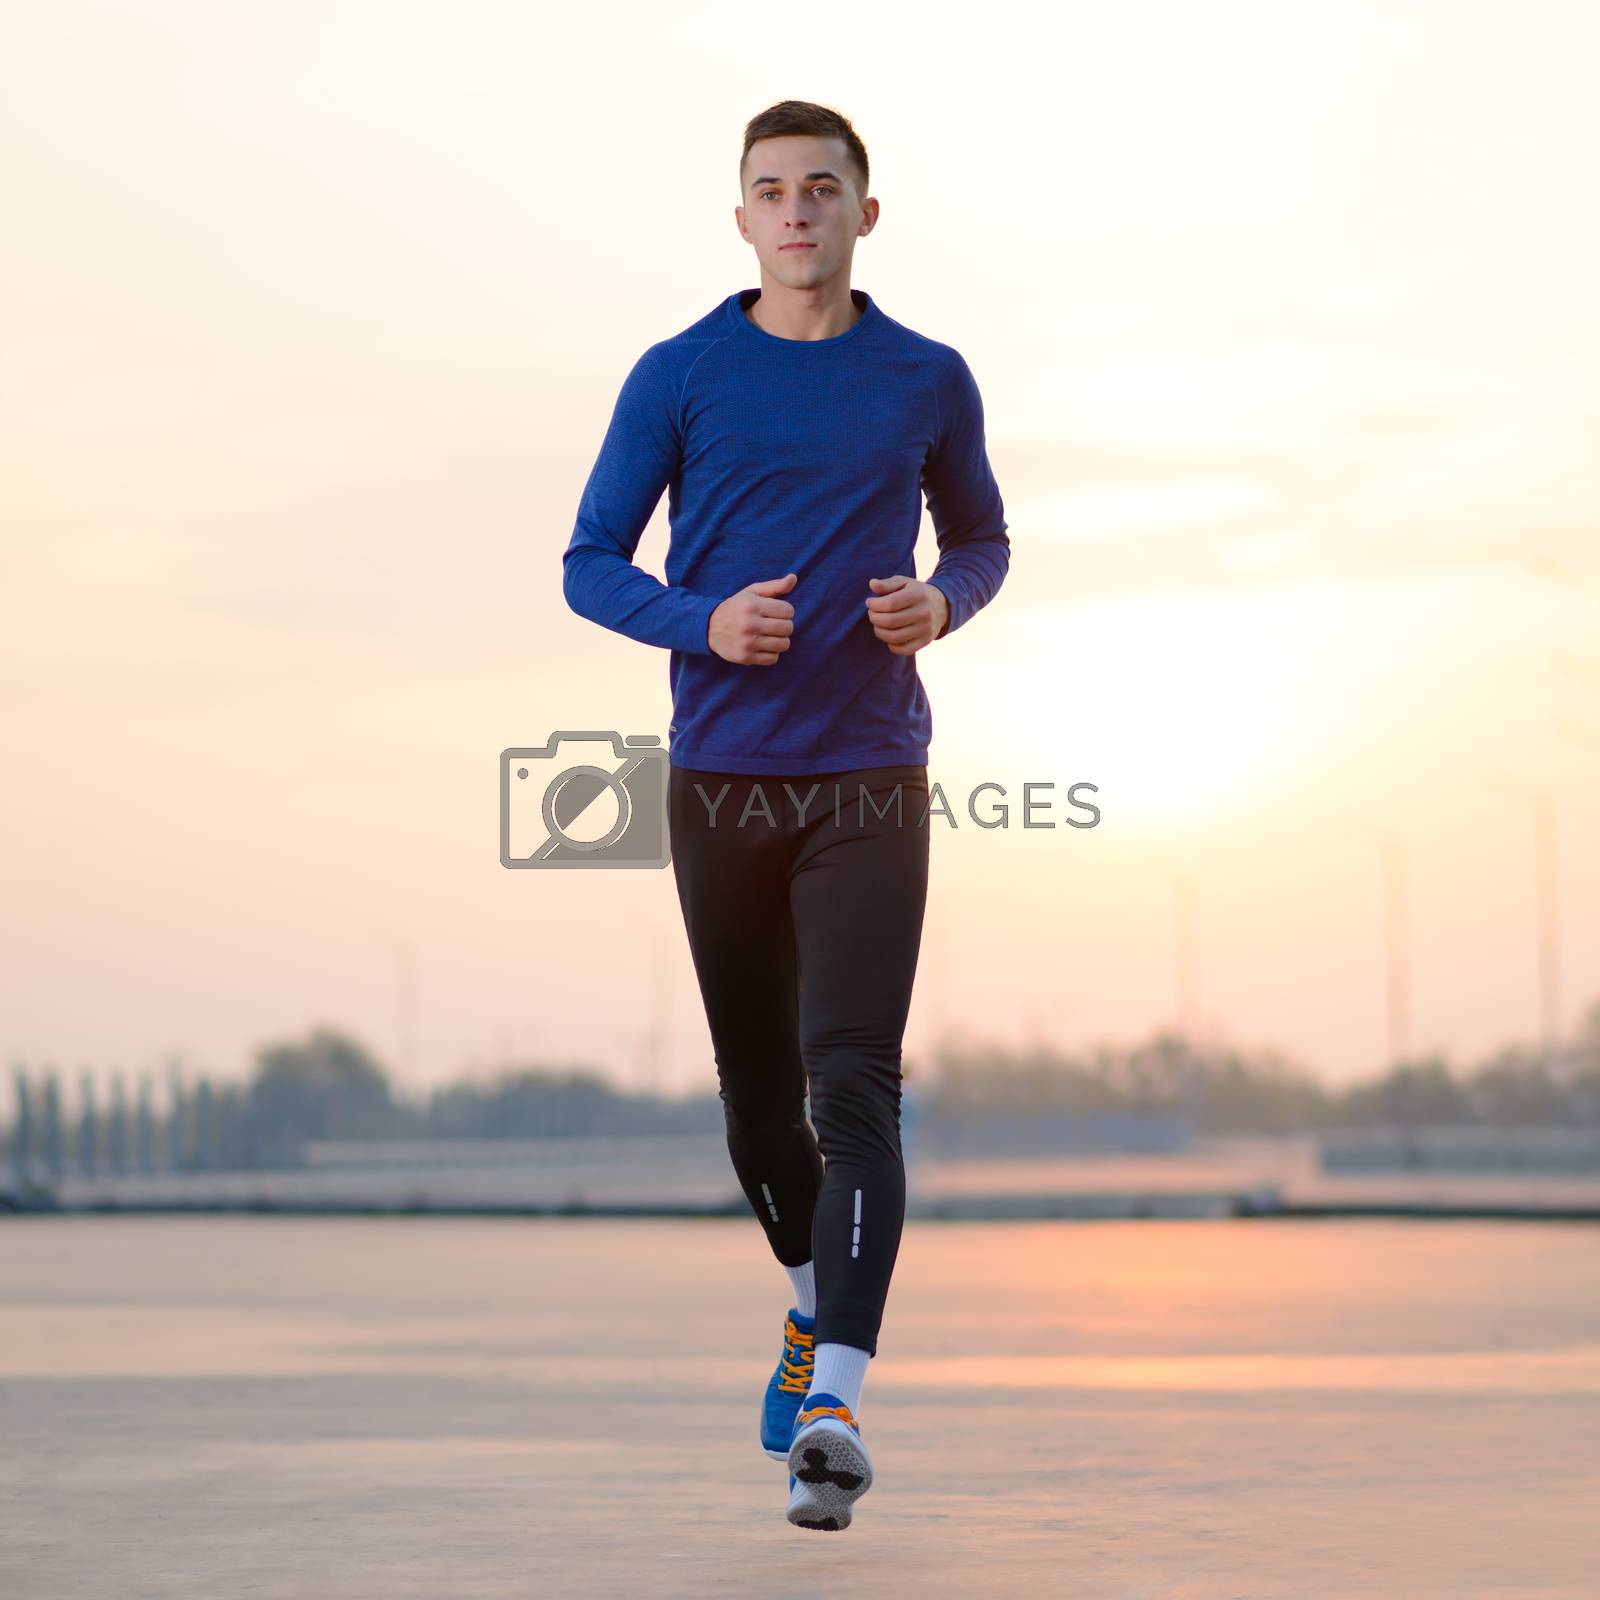 Royalty free image of Young Sports Man Running at Sunset. Healthy Lifestyle and Sport Concept. by maxpro